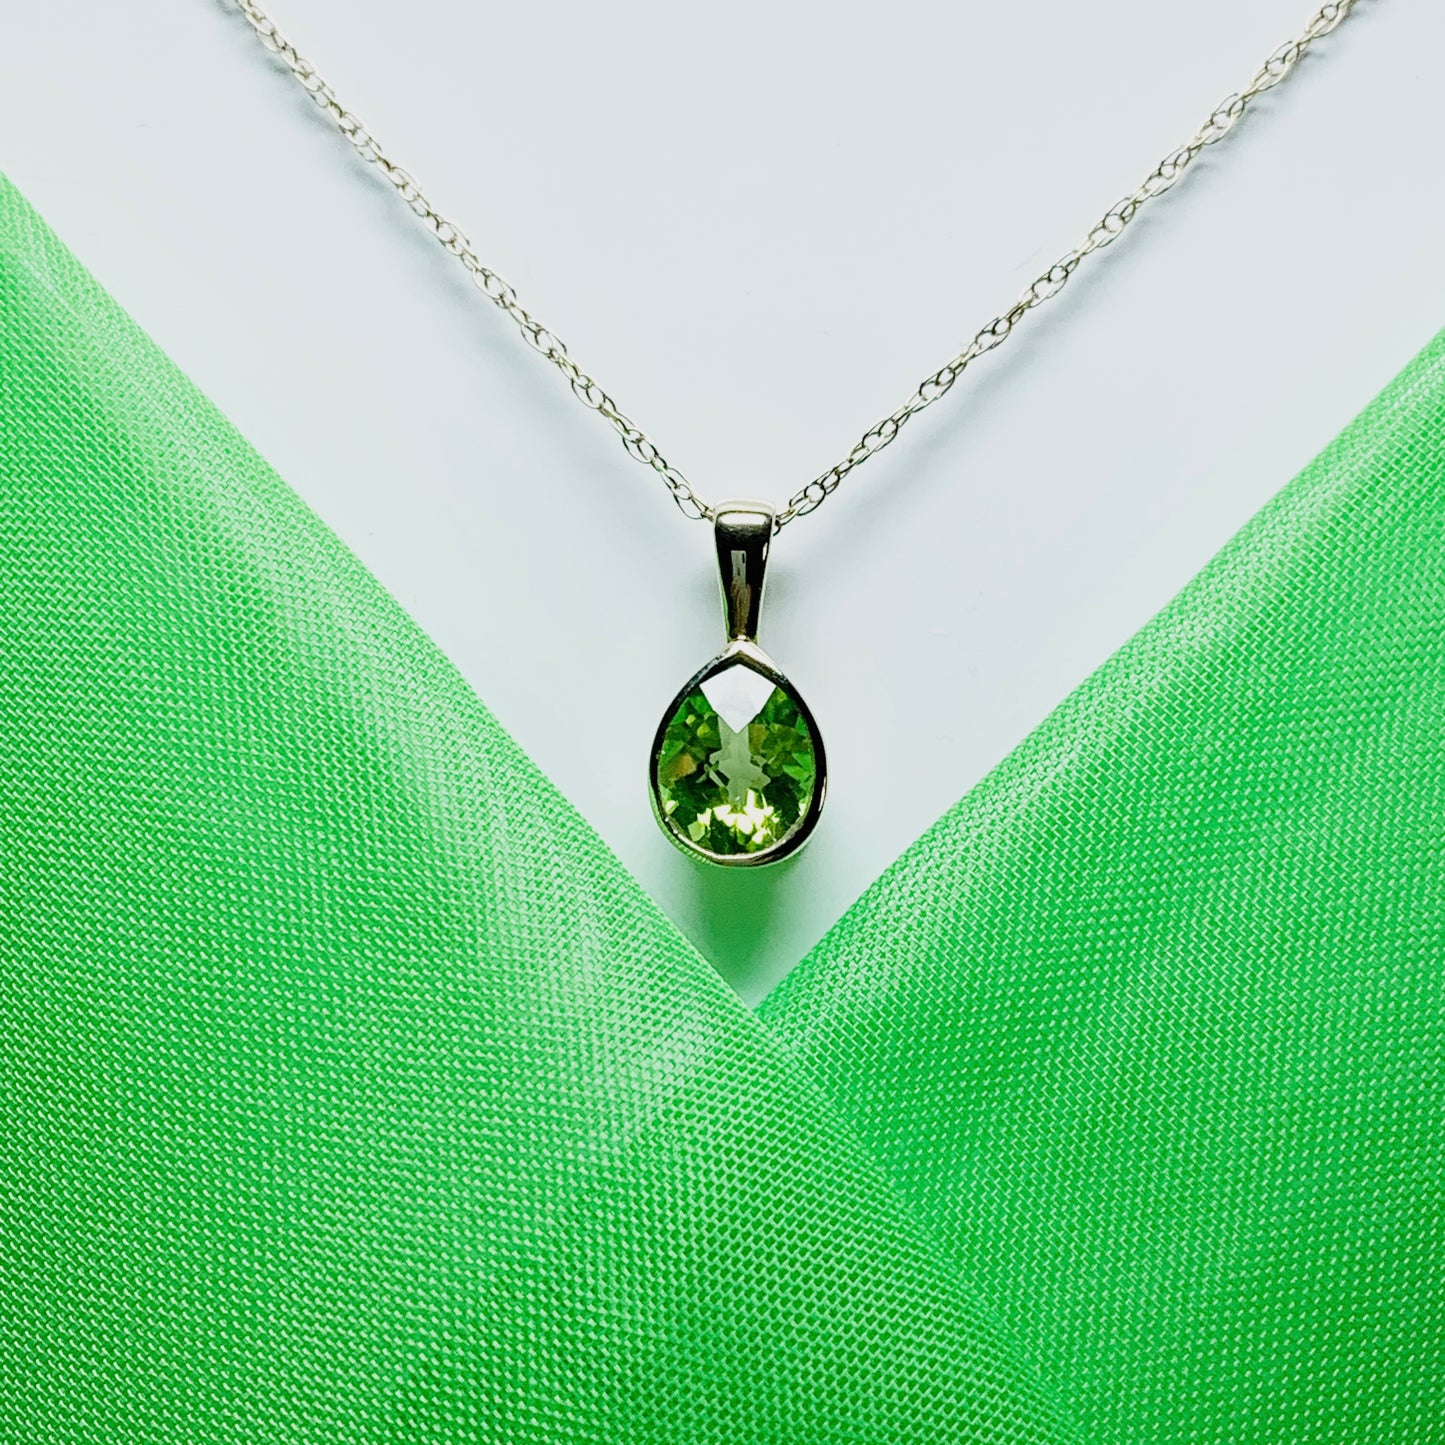 Pear peridot rubbed over yellow gold necklace